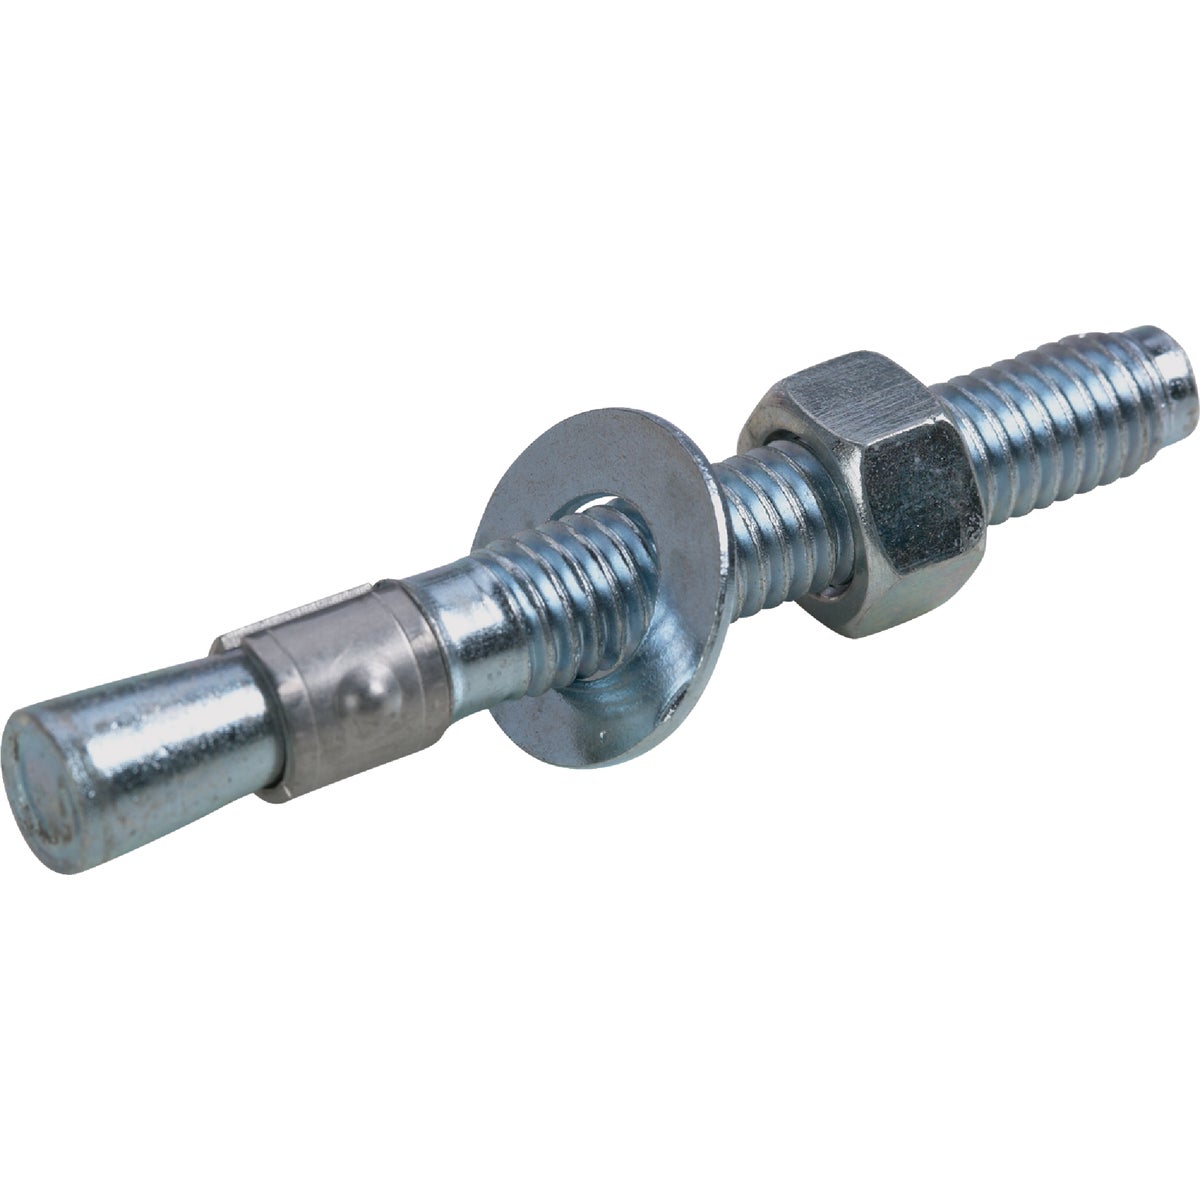 Item 700003, Red Head wedge anchors are heavy-duty, zinc-plated, steel anchors designed 